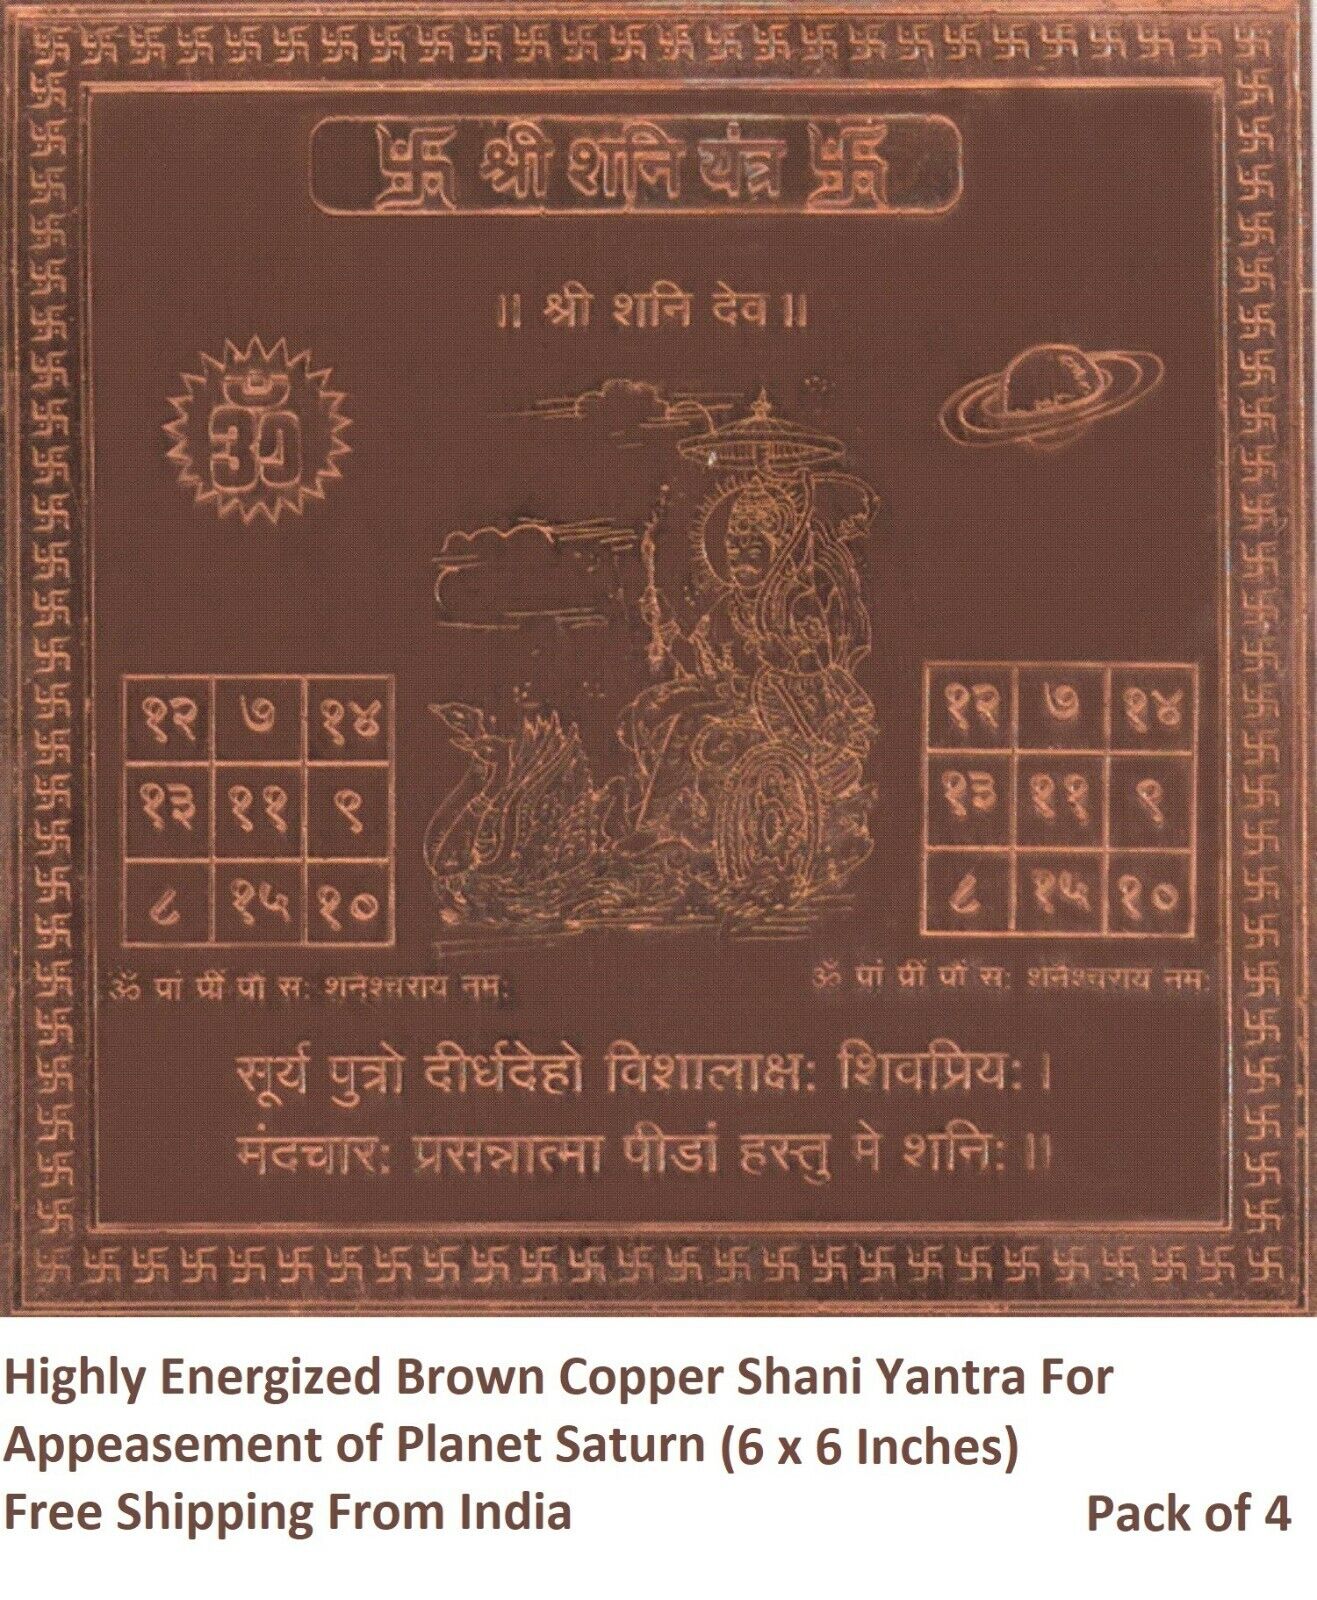 4 x Brown Copper Shani Yantra For Appeasement of Planet Saturn (6 x 6 Inches)